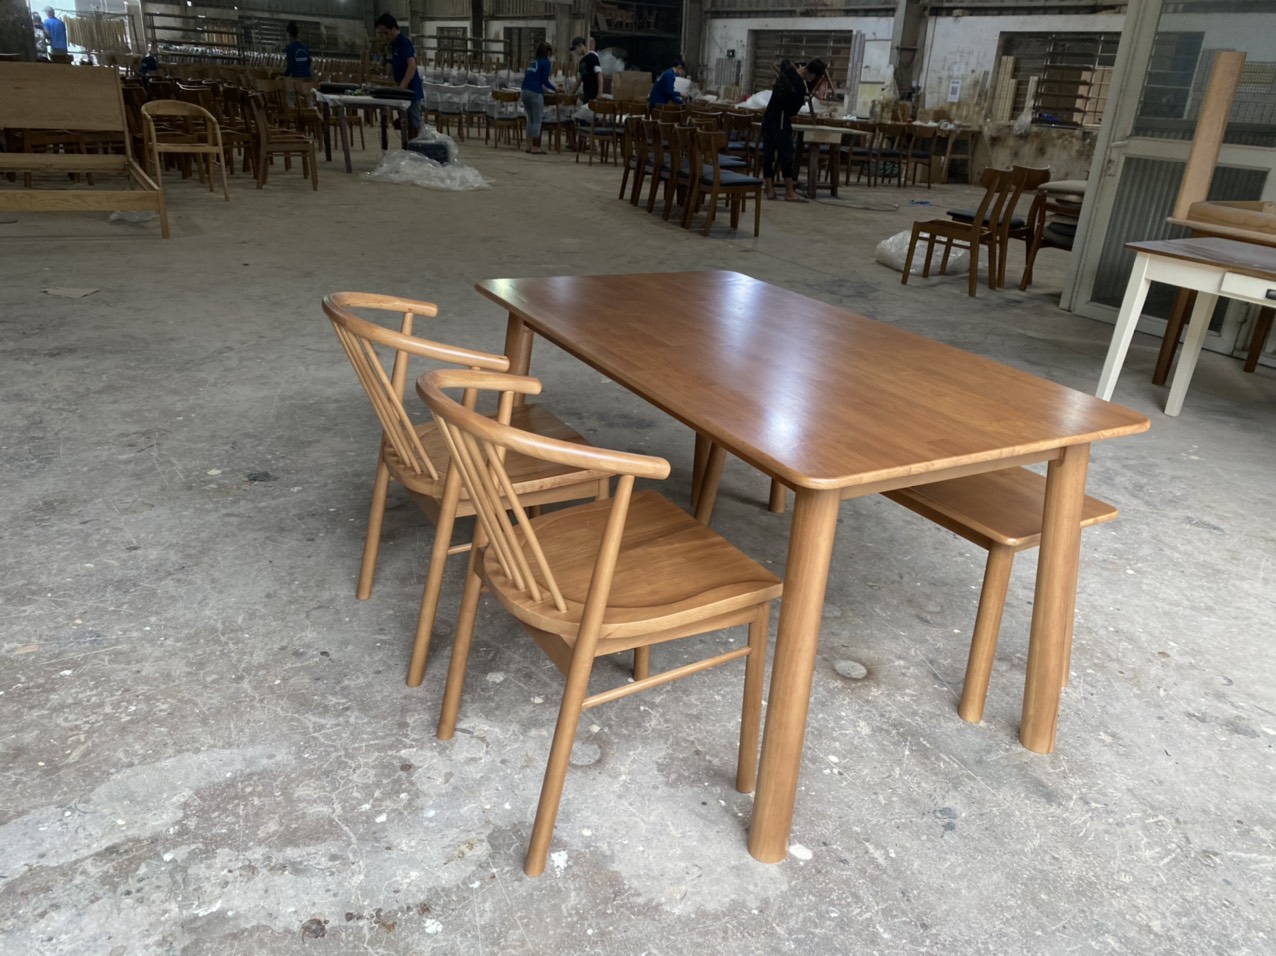 High Grade Product Coffee Tables Outdoor Indoor Furniture Wooden Eco Friendly Sustainable Hot Price For Export Set 6